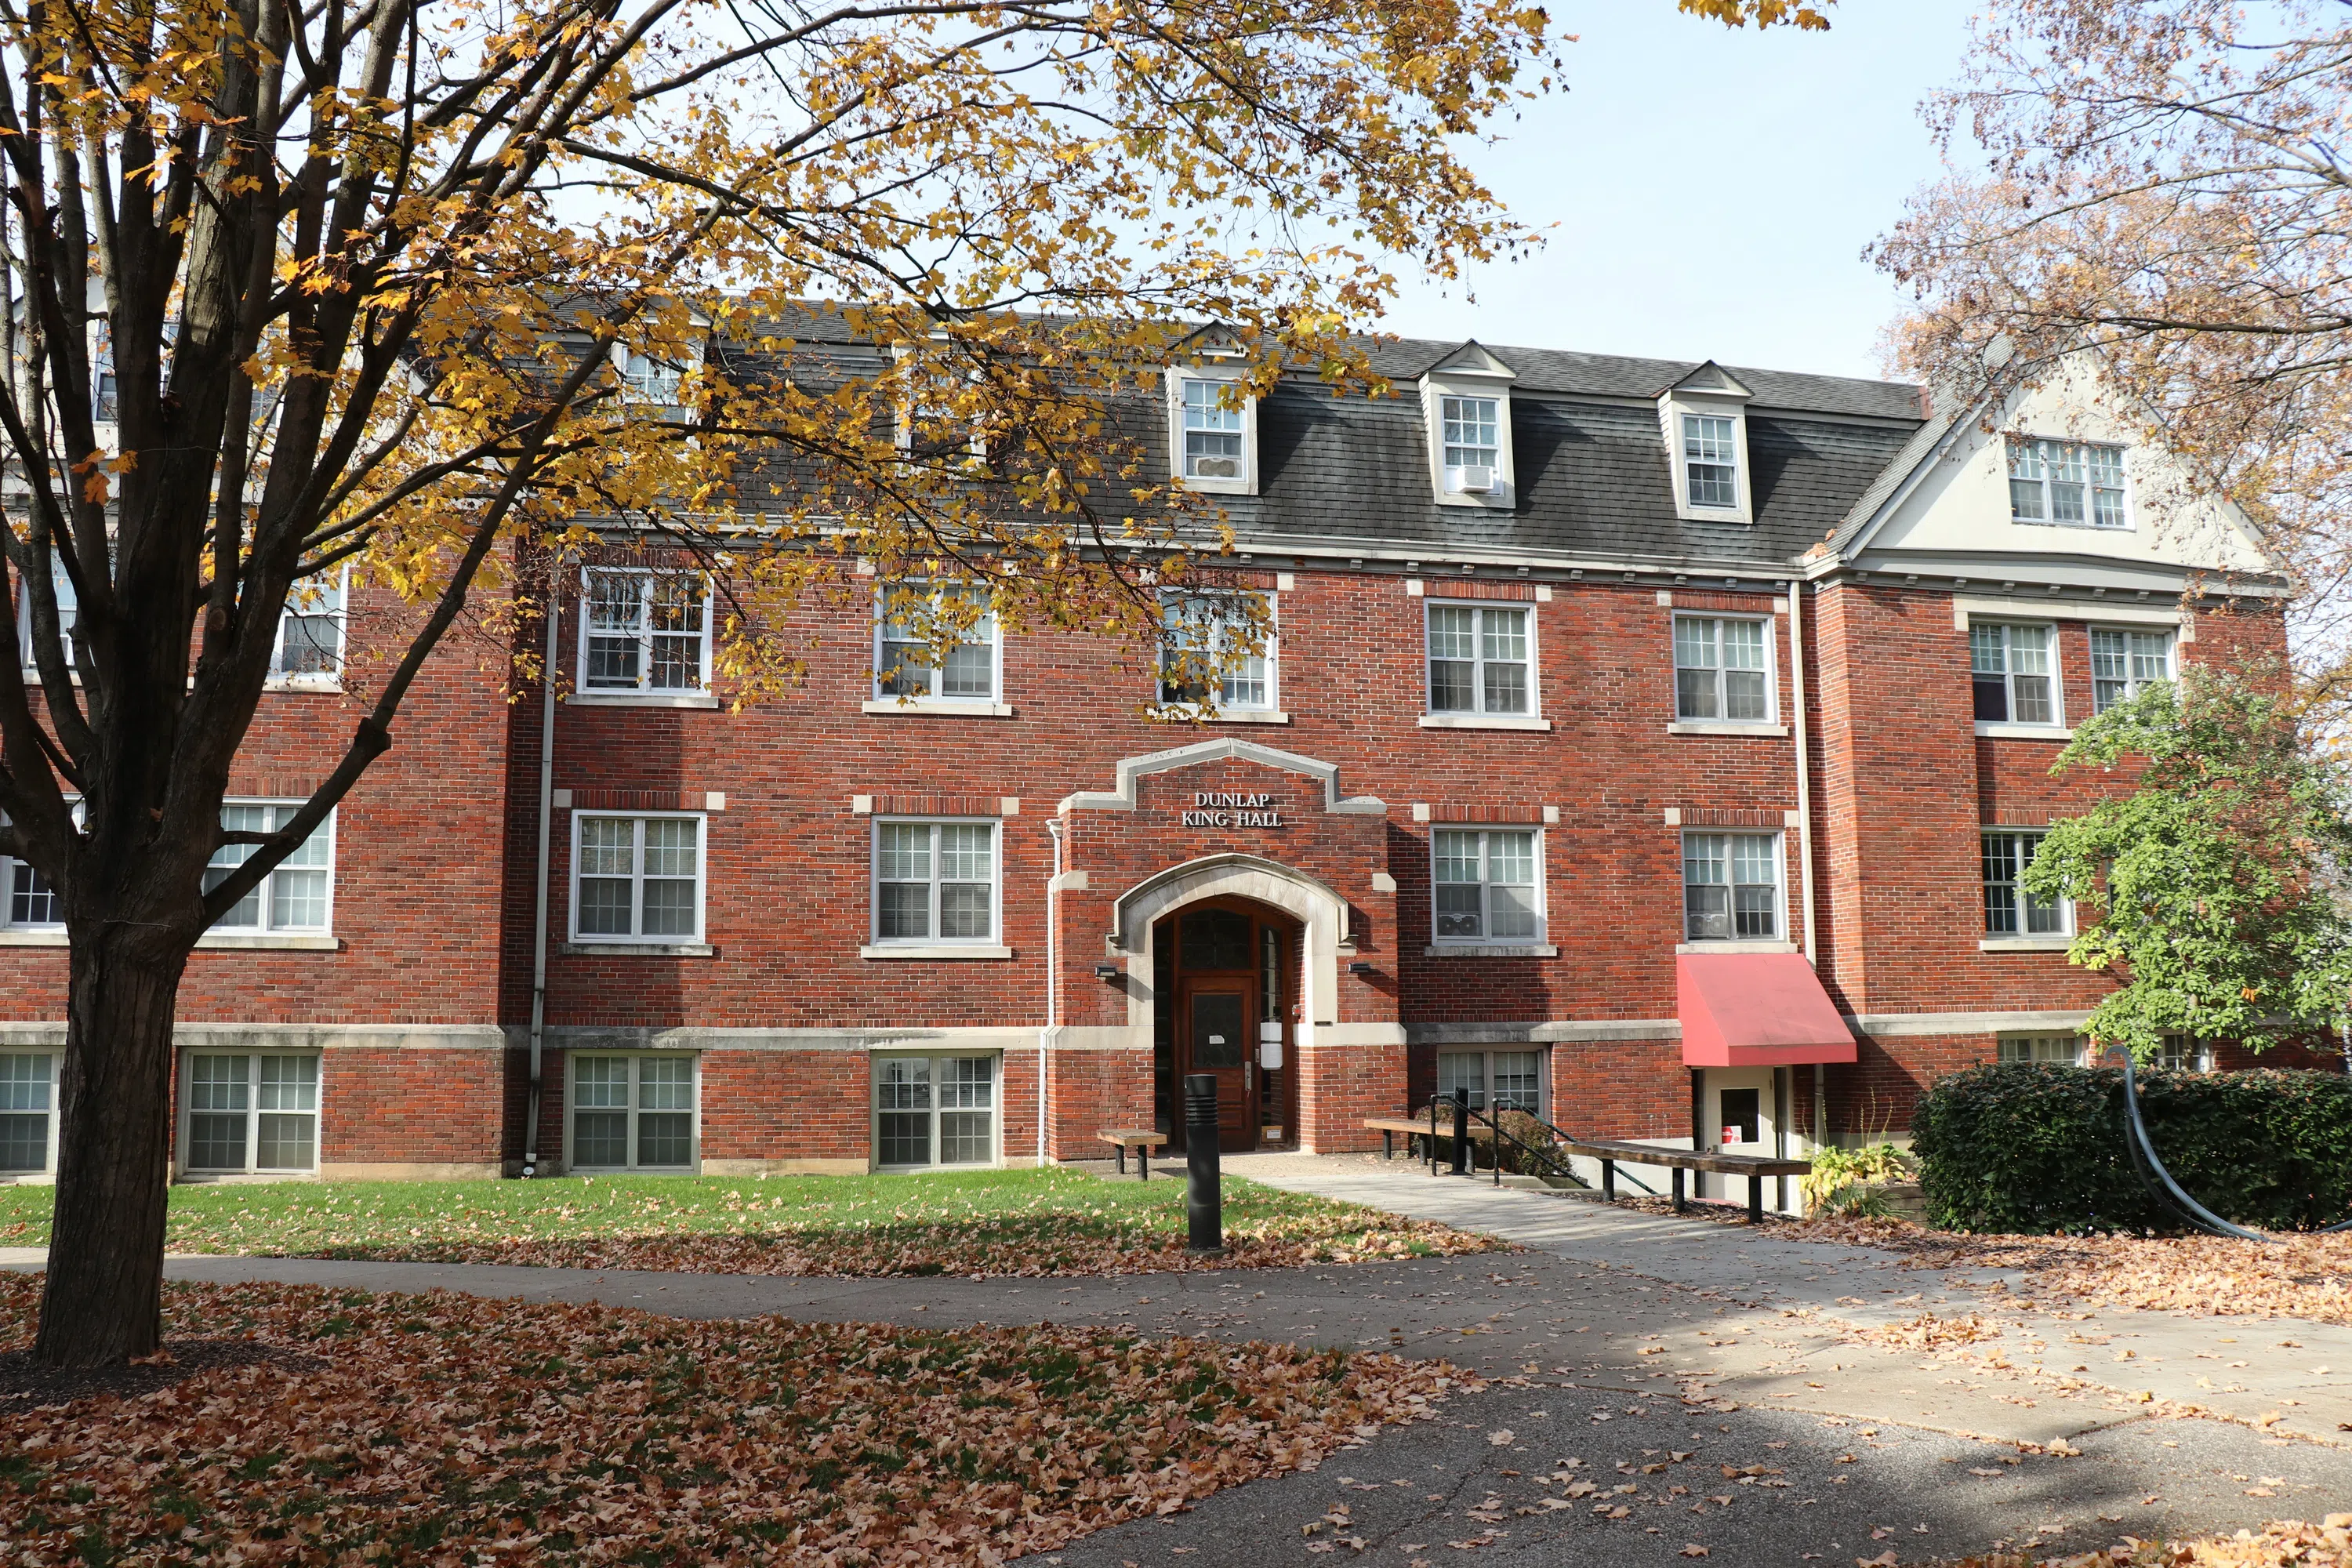 Main view of DK Hall, a four story brick building in a classic style.